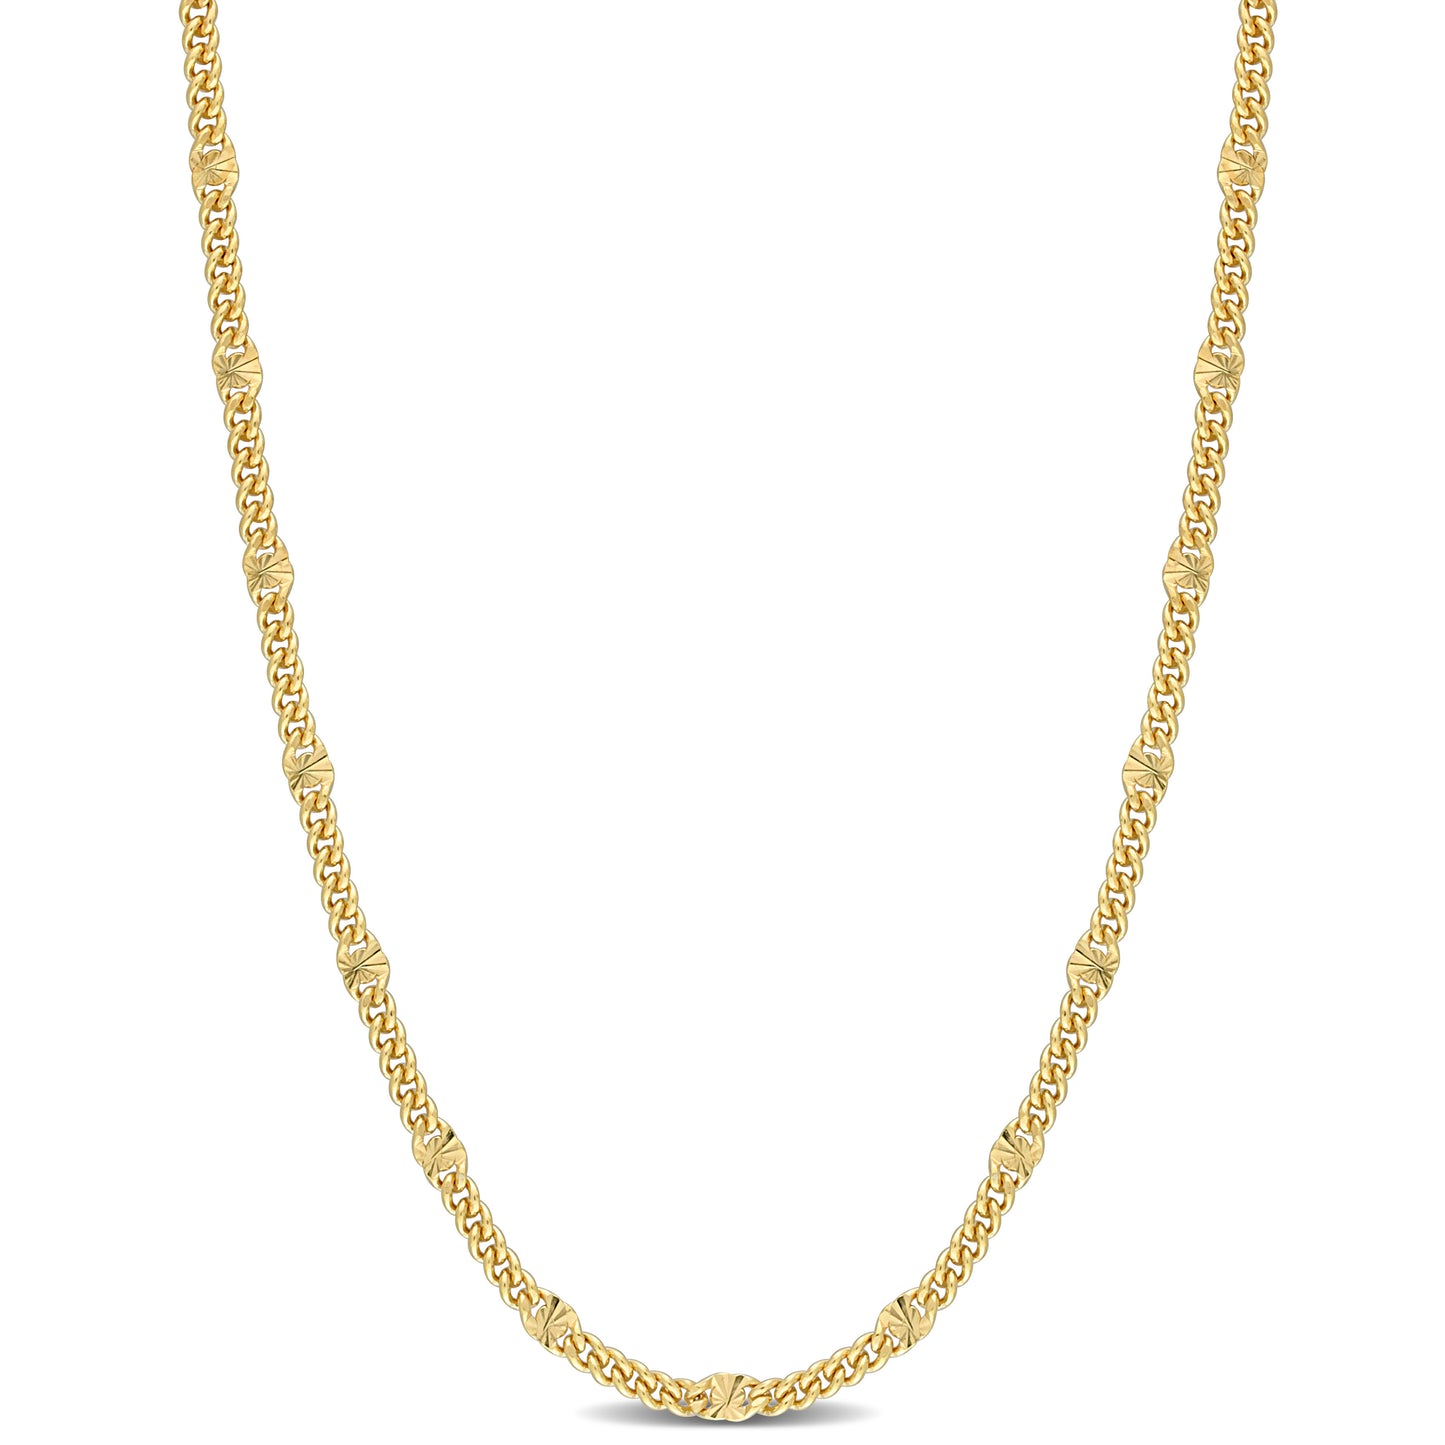 Double curb link chain necklace in yellow plated silver 16”